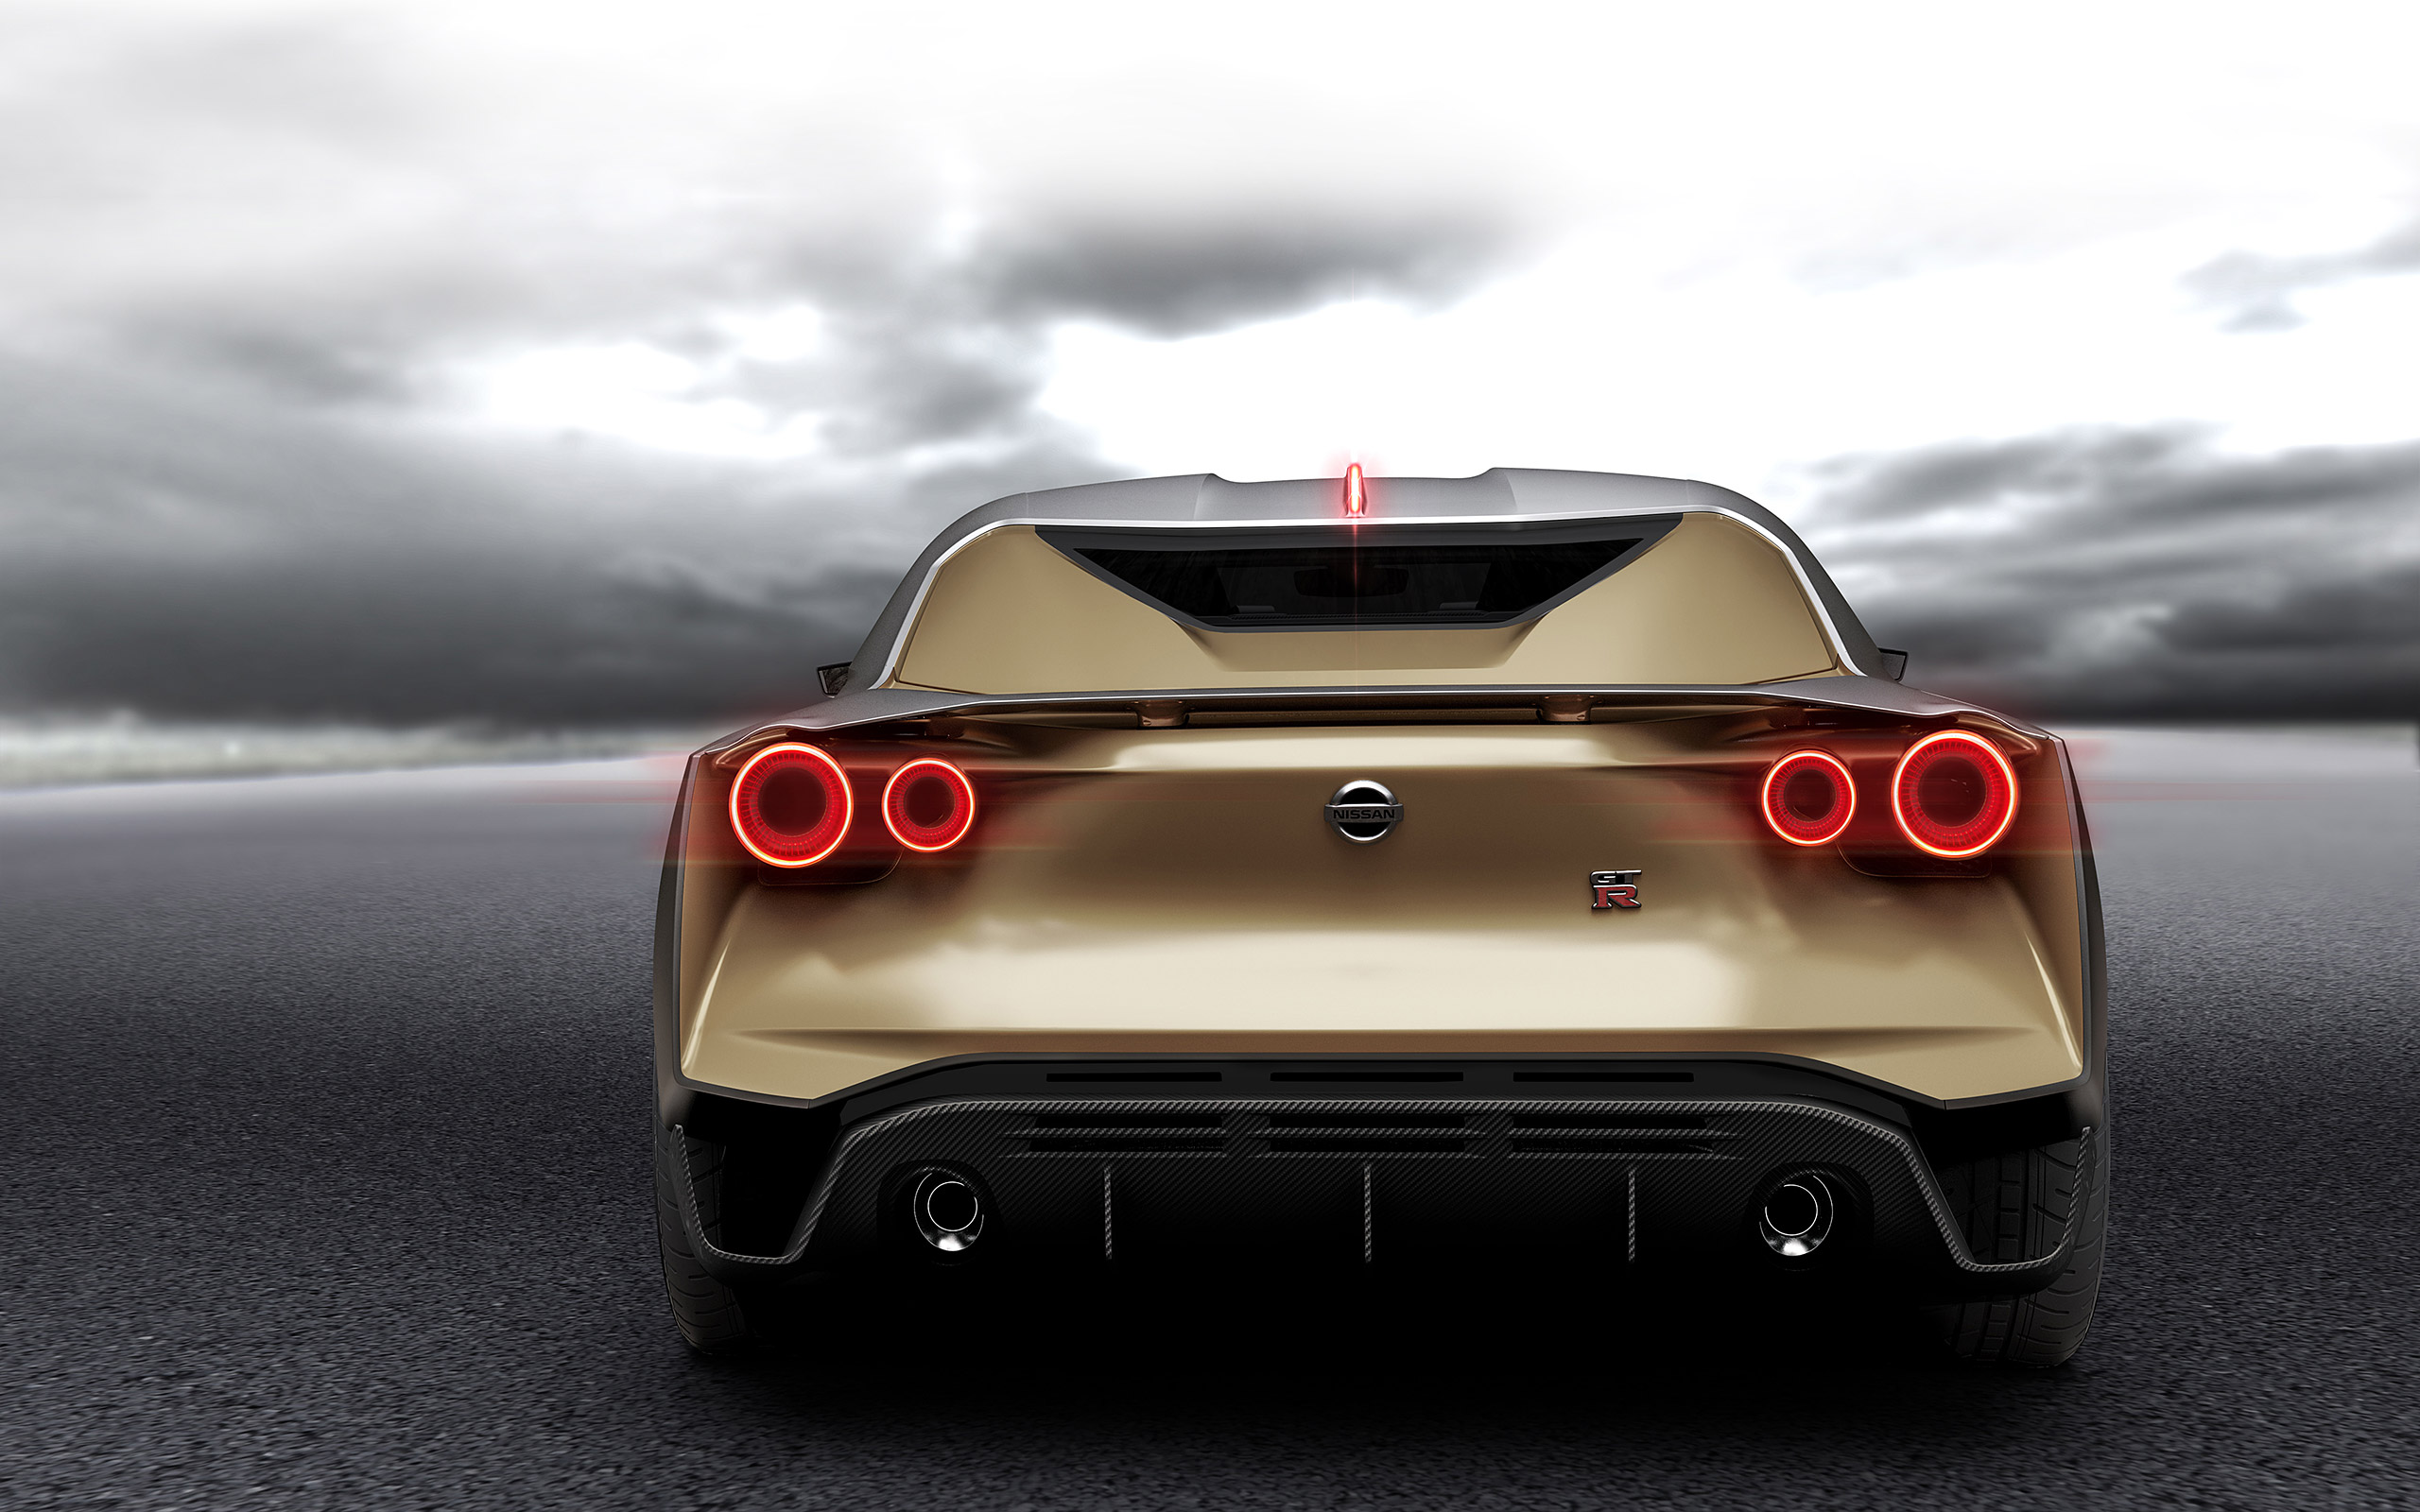  2018 Nissan GT-R50 by Italdesign Concept Wallpaper.